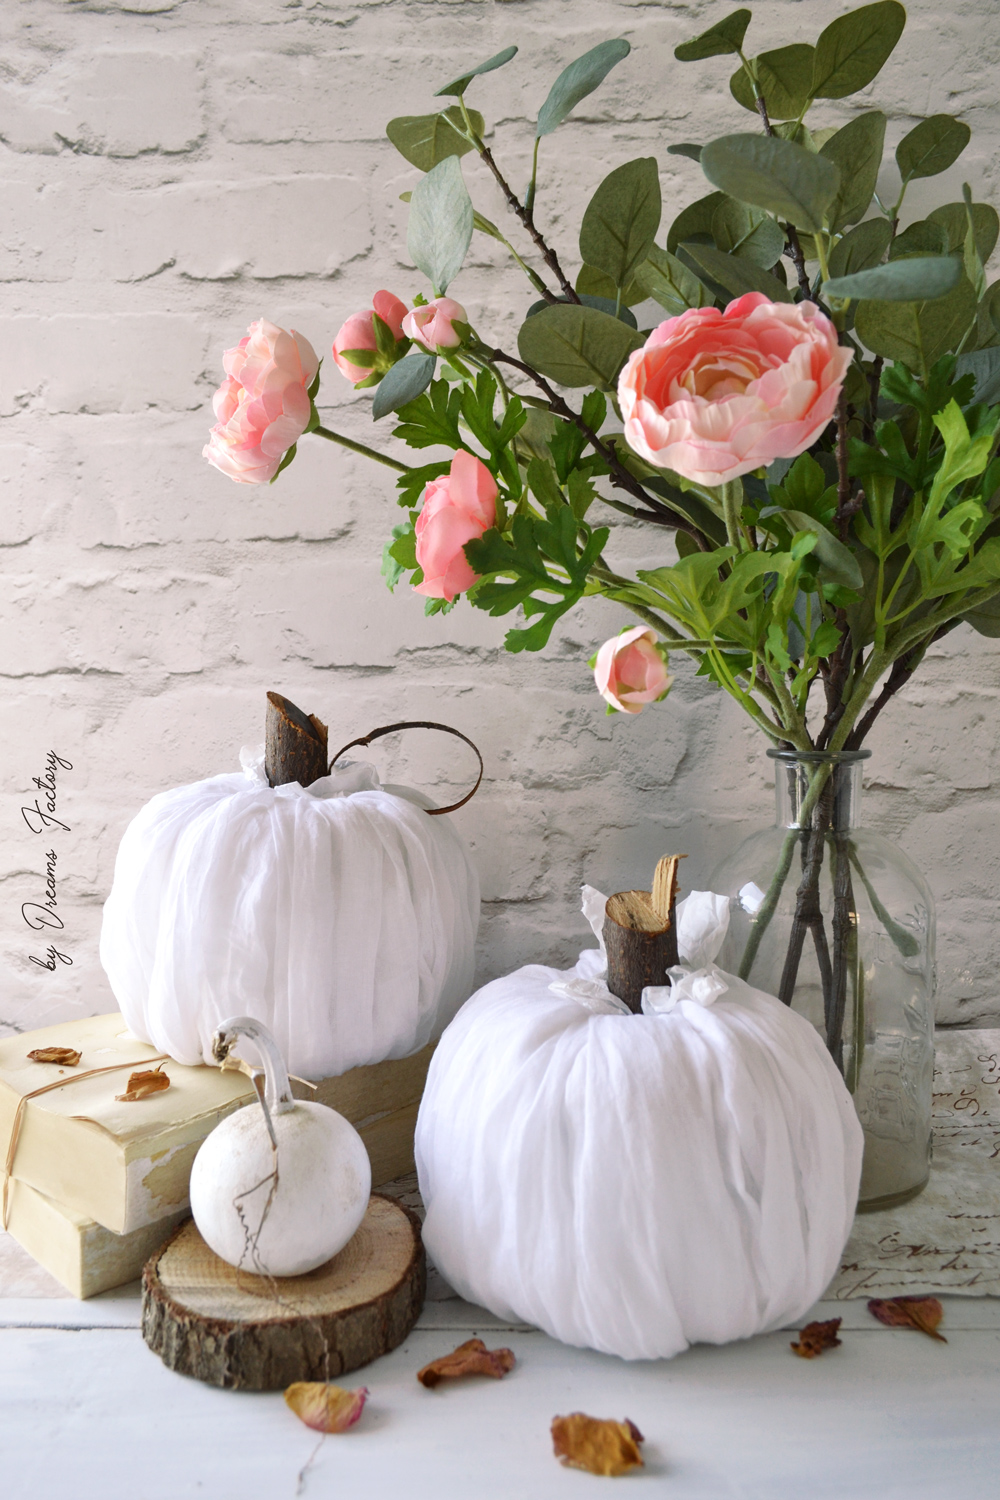 Make these stunning DIY no-sew fabric pumpkins in just 5 minutes and use them all over your home for beautiful fall decorating - by Dreams Factory